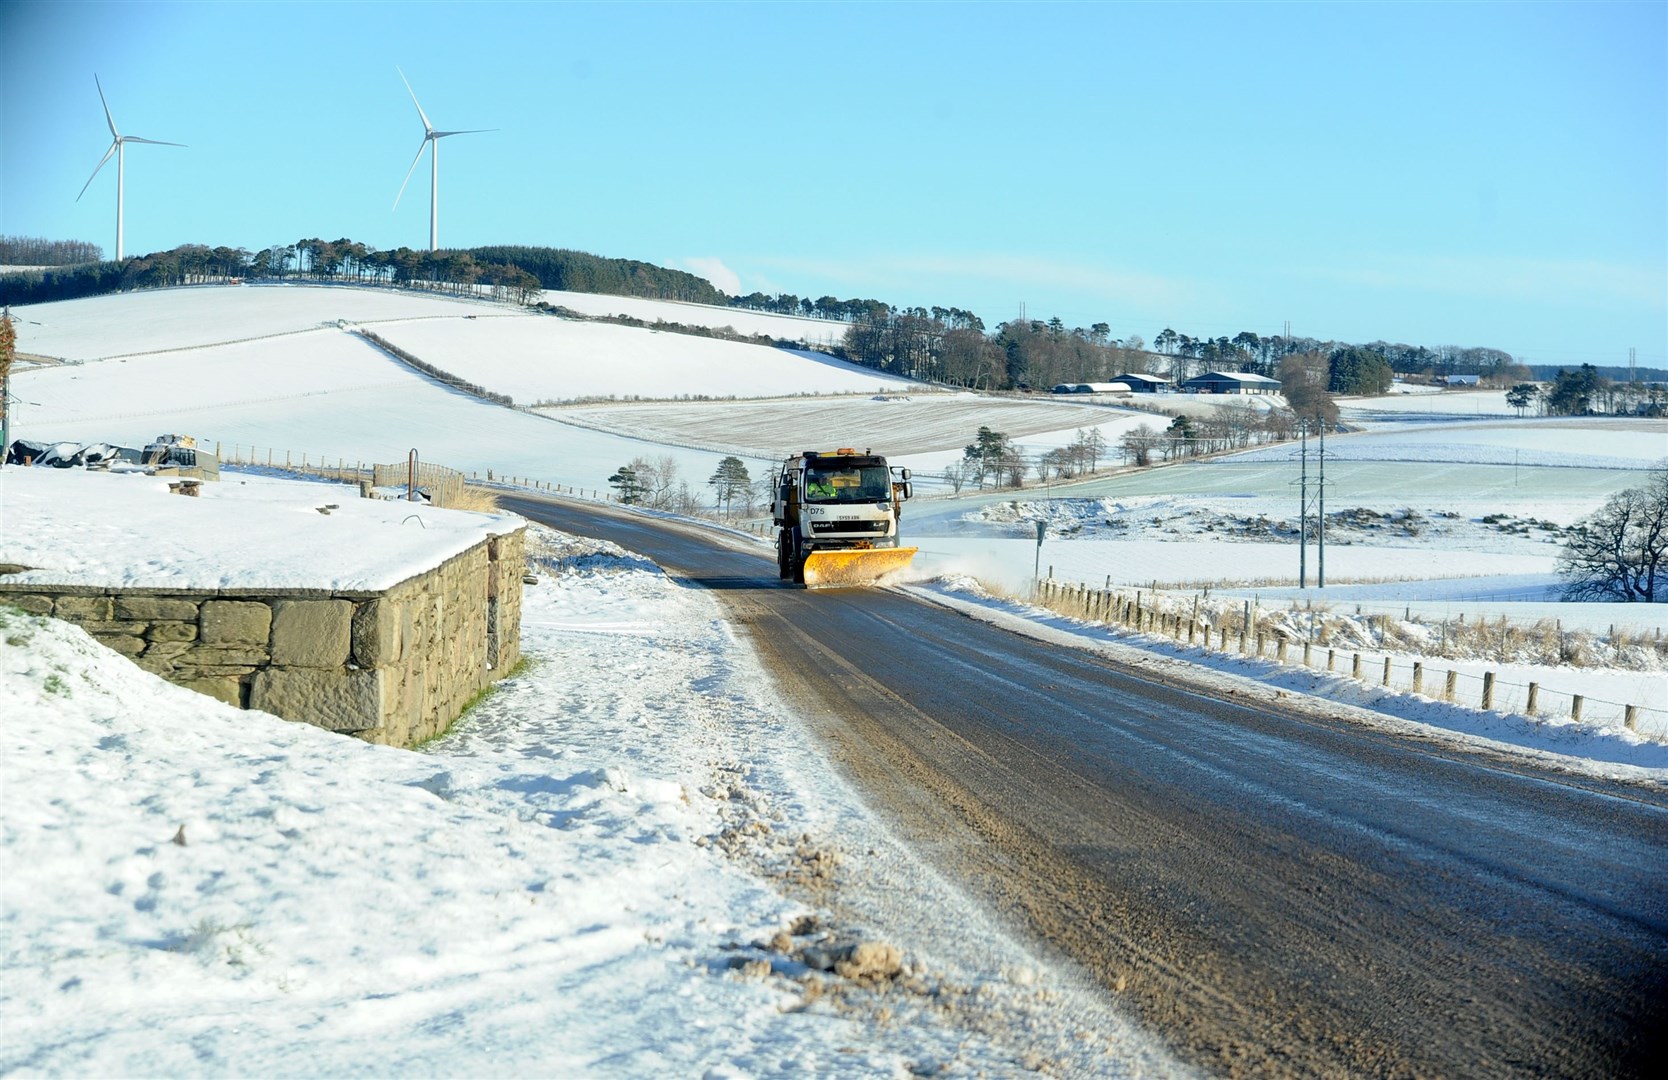 Snow ploughs could be out in force with up to 11 inches of snow forecast.